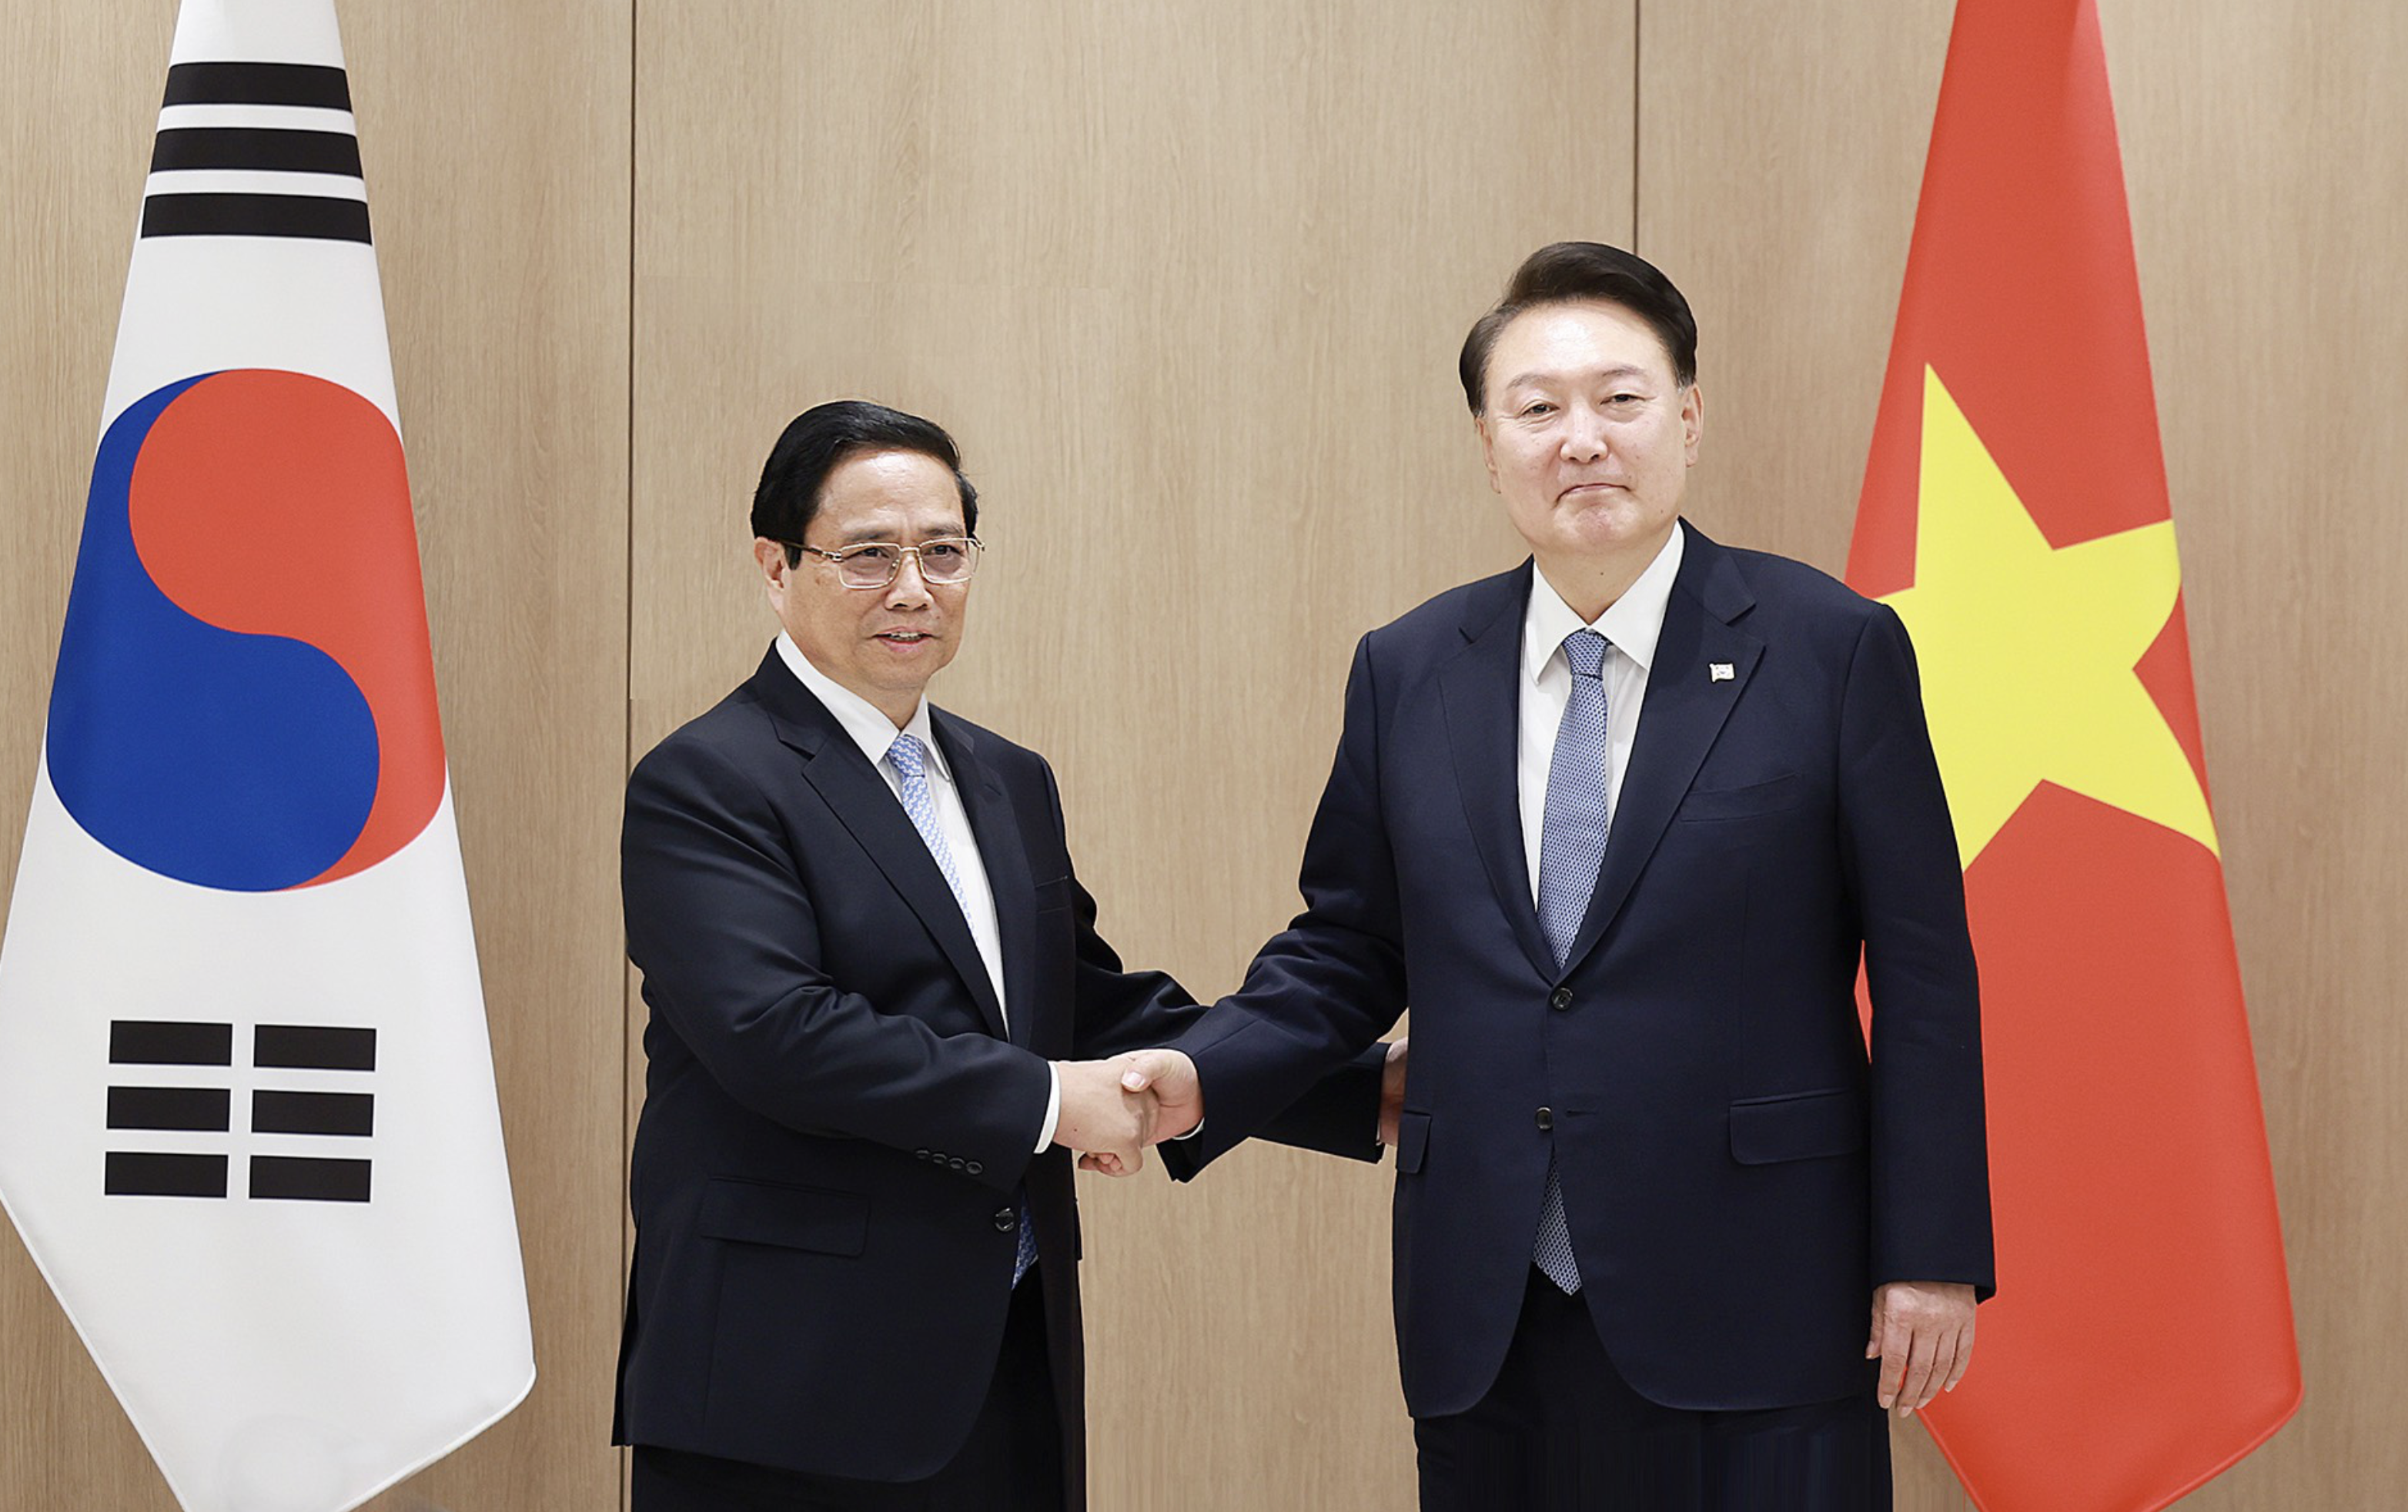 S. Korean president pledges to help Vietnam with semiconductor training